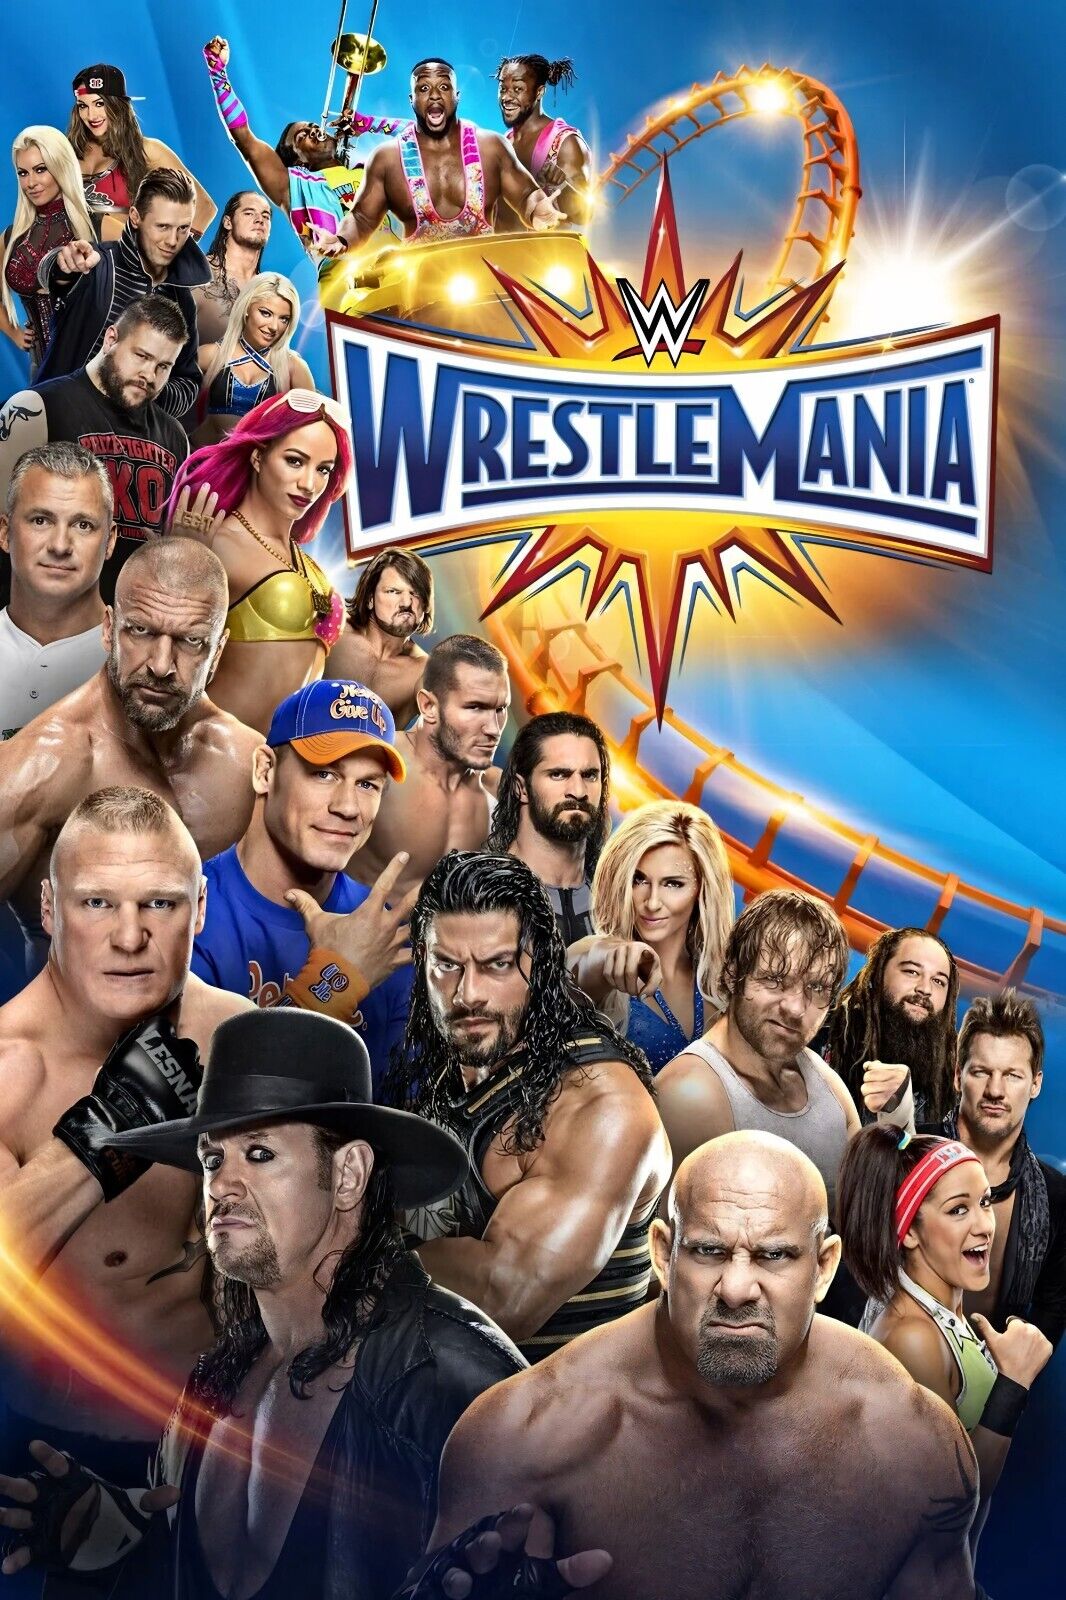 WWE Wrestlemania 33 Poster (2017) - 11x17 Inches | NEW USA